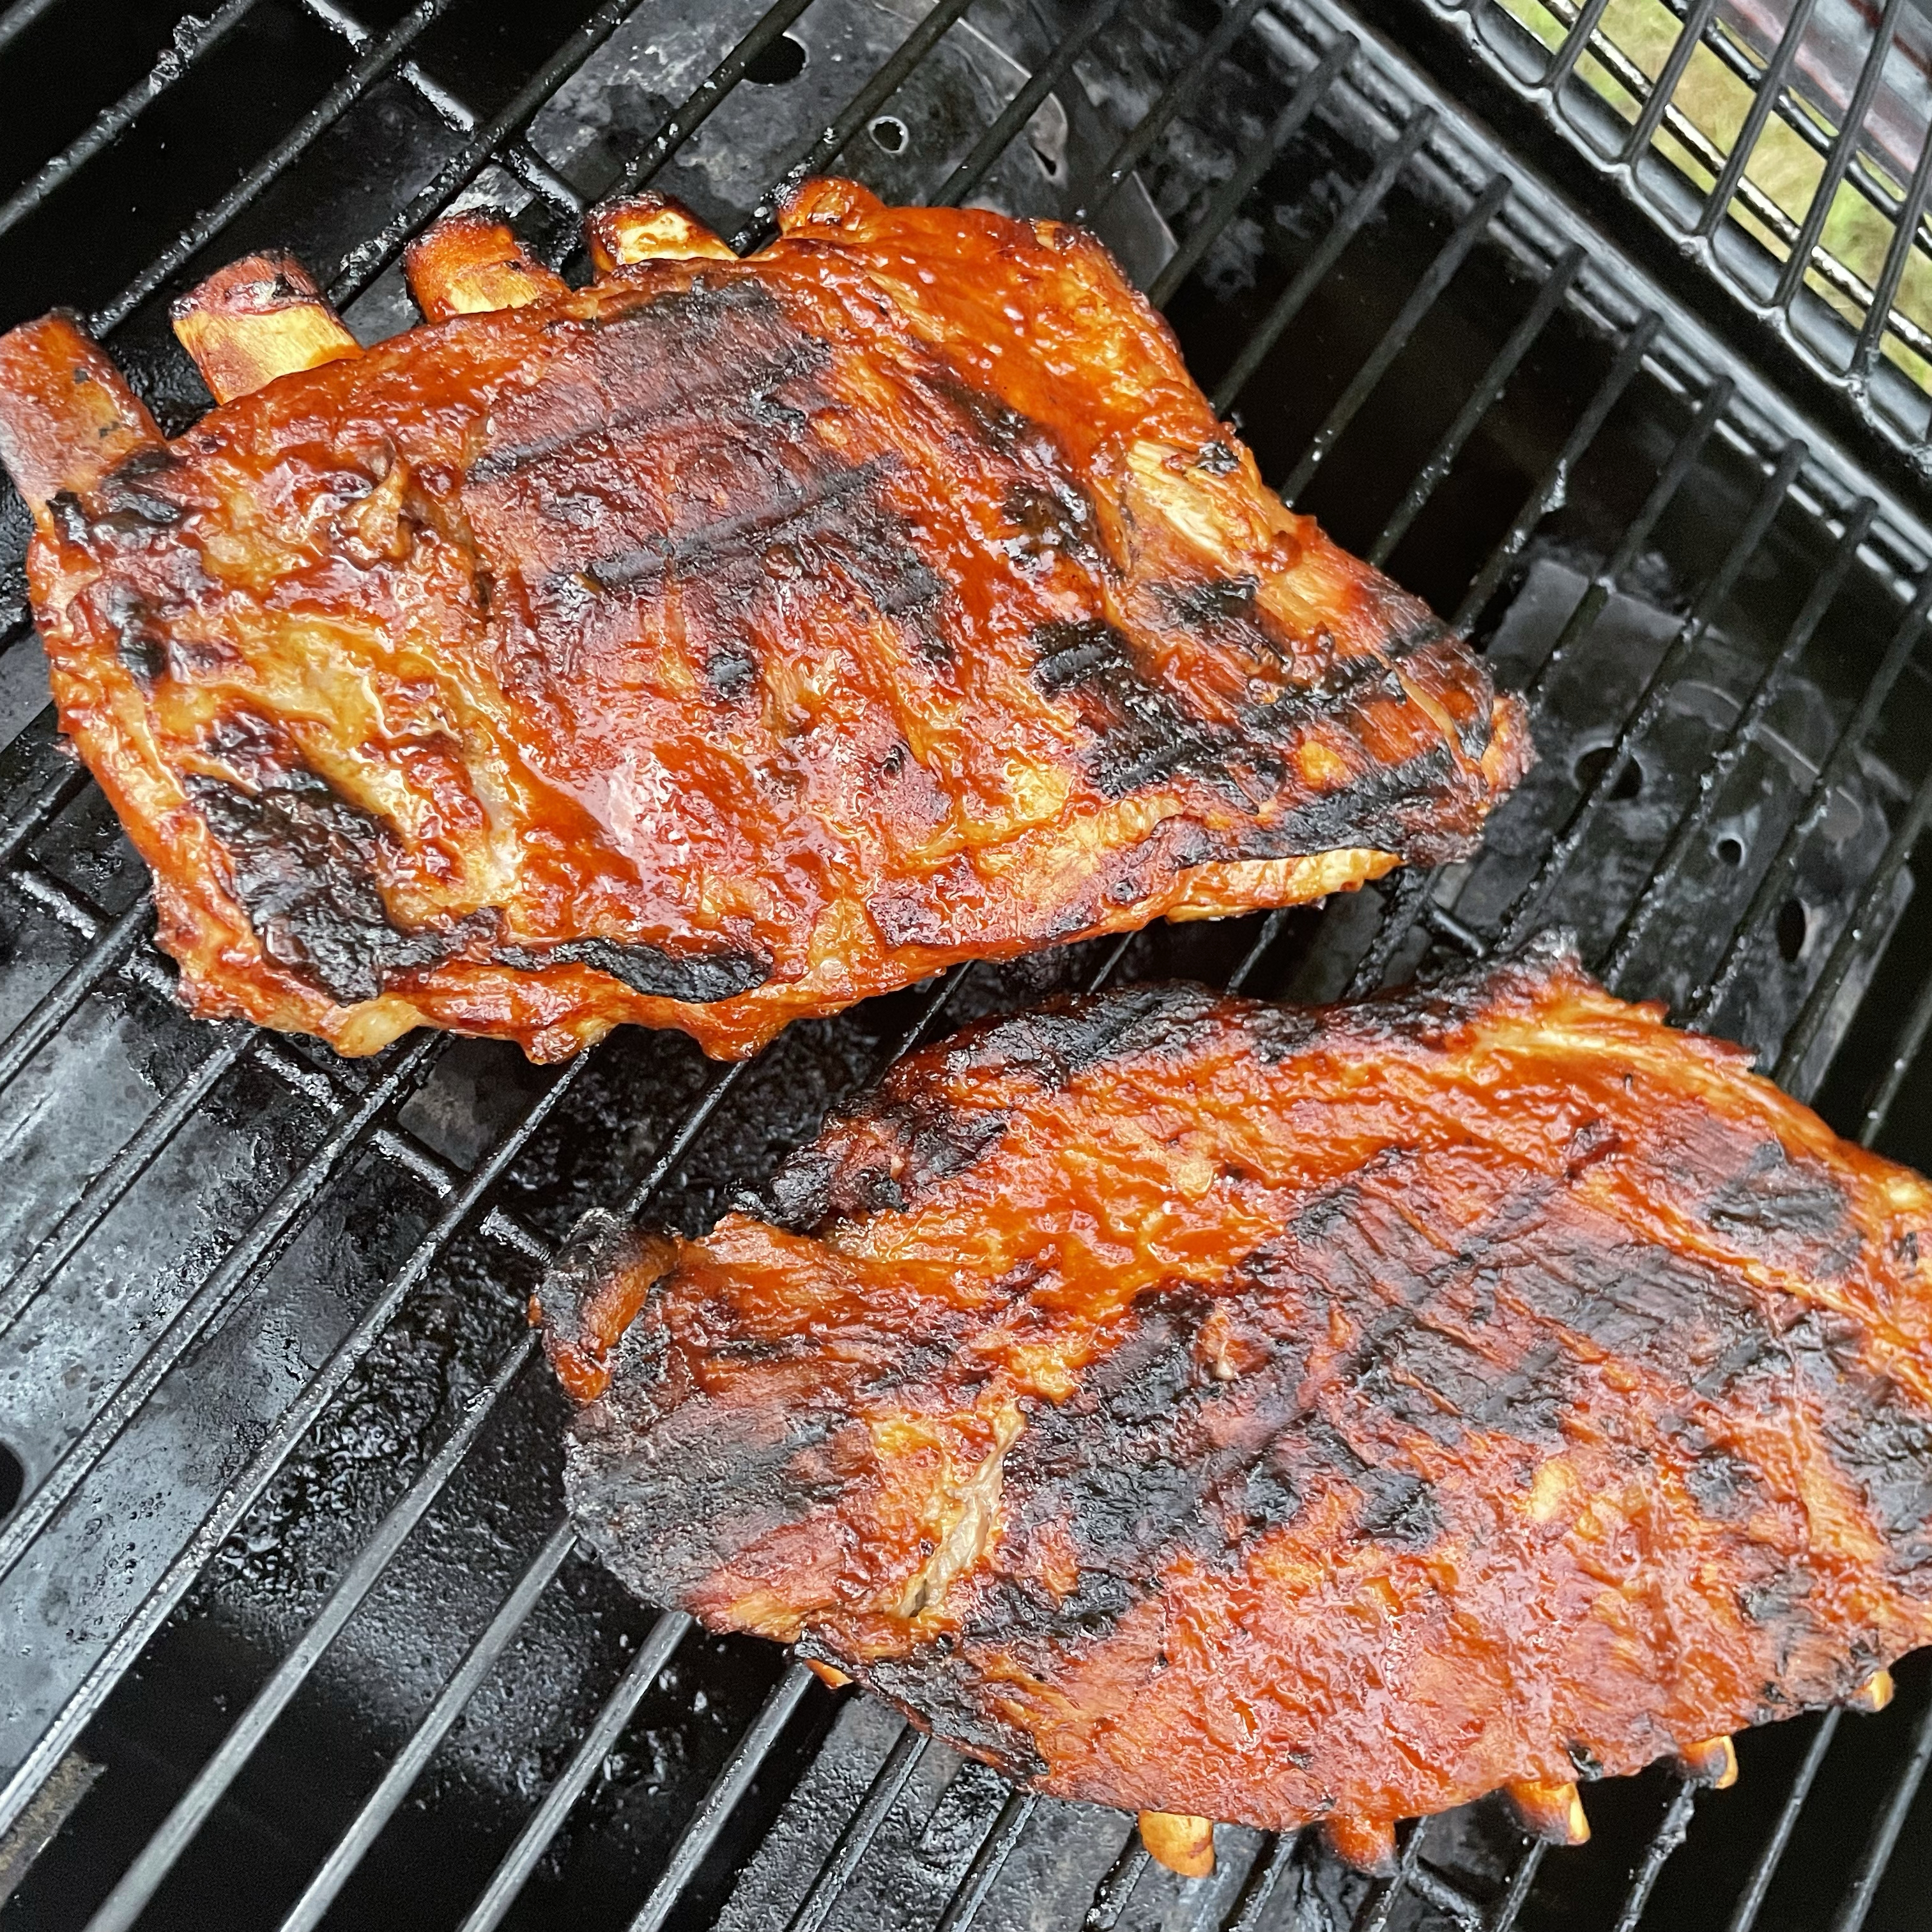 Southern Grilled Barbecued Ribs 